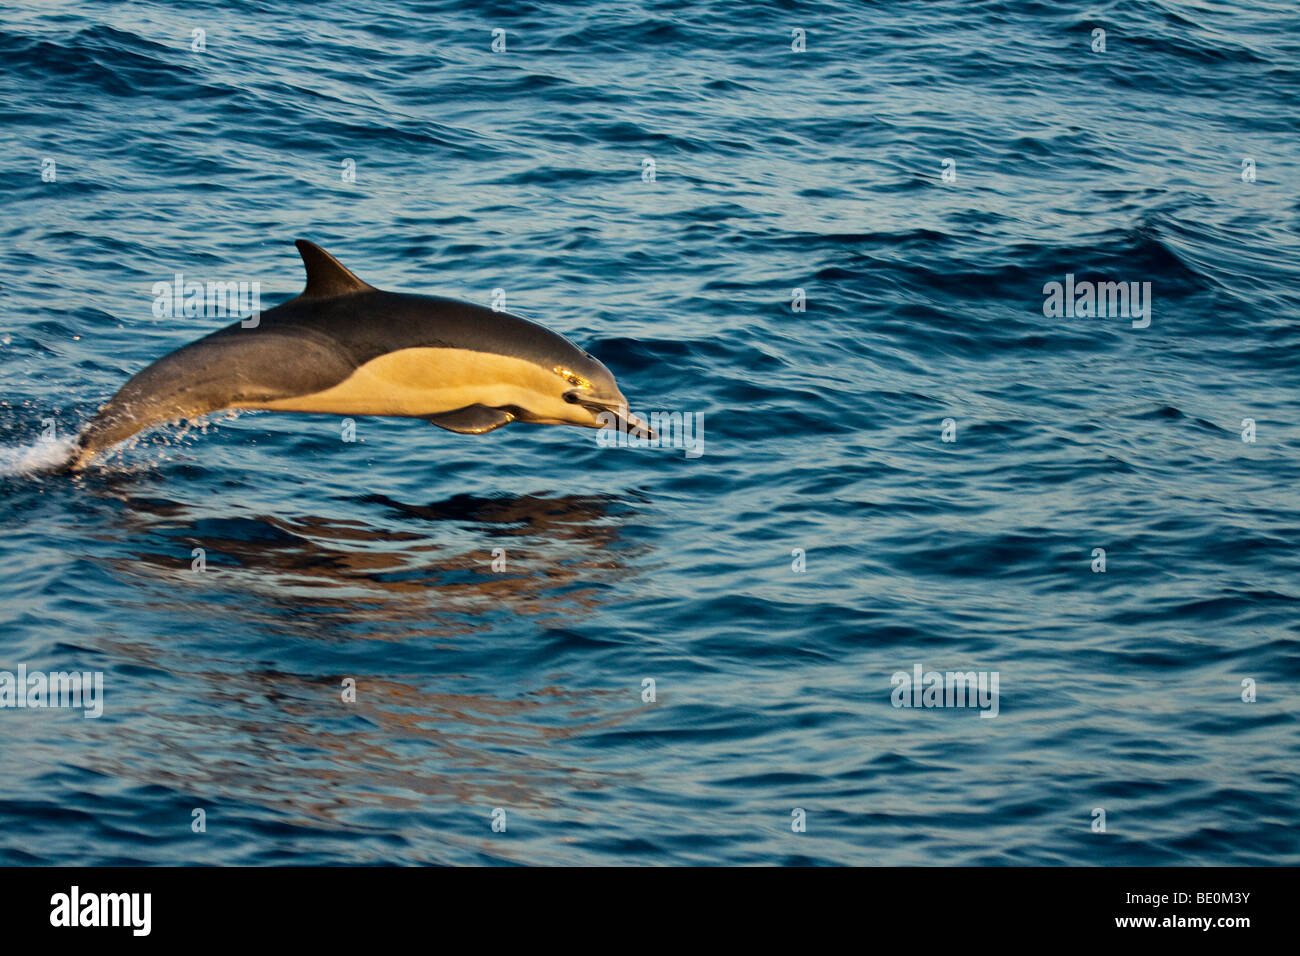 This common dolphin, Delphinus delphis, was one in a school of over 1000 in the Pacific, off Mexico. Stock Photo